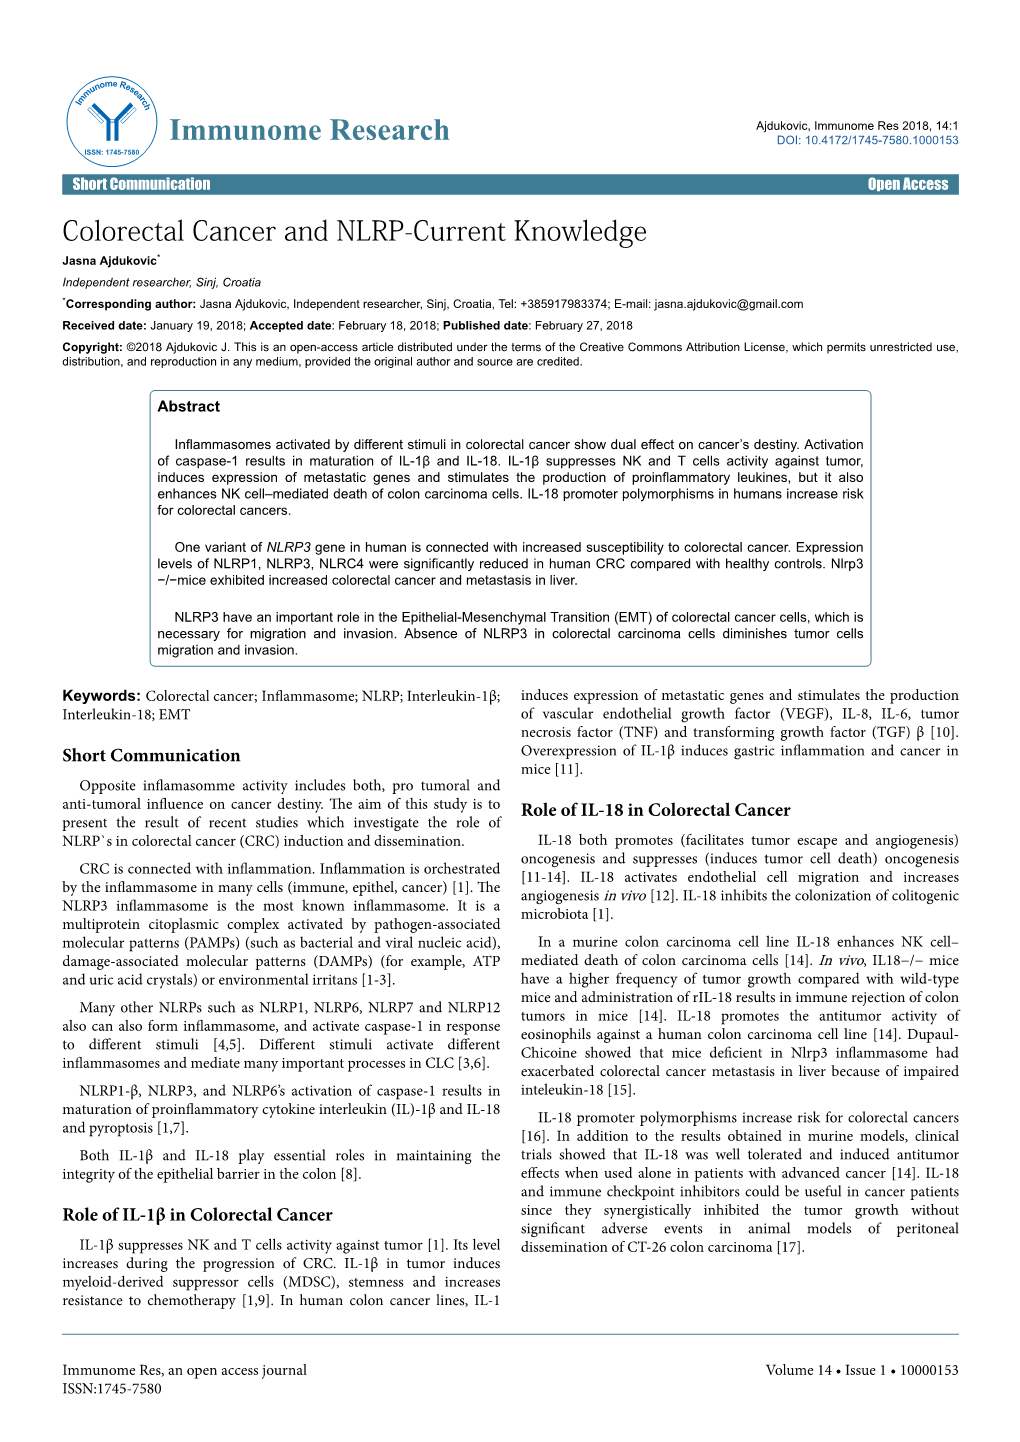 Colorectal Cancer and NLRP-Current Knowledge